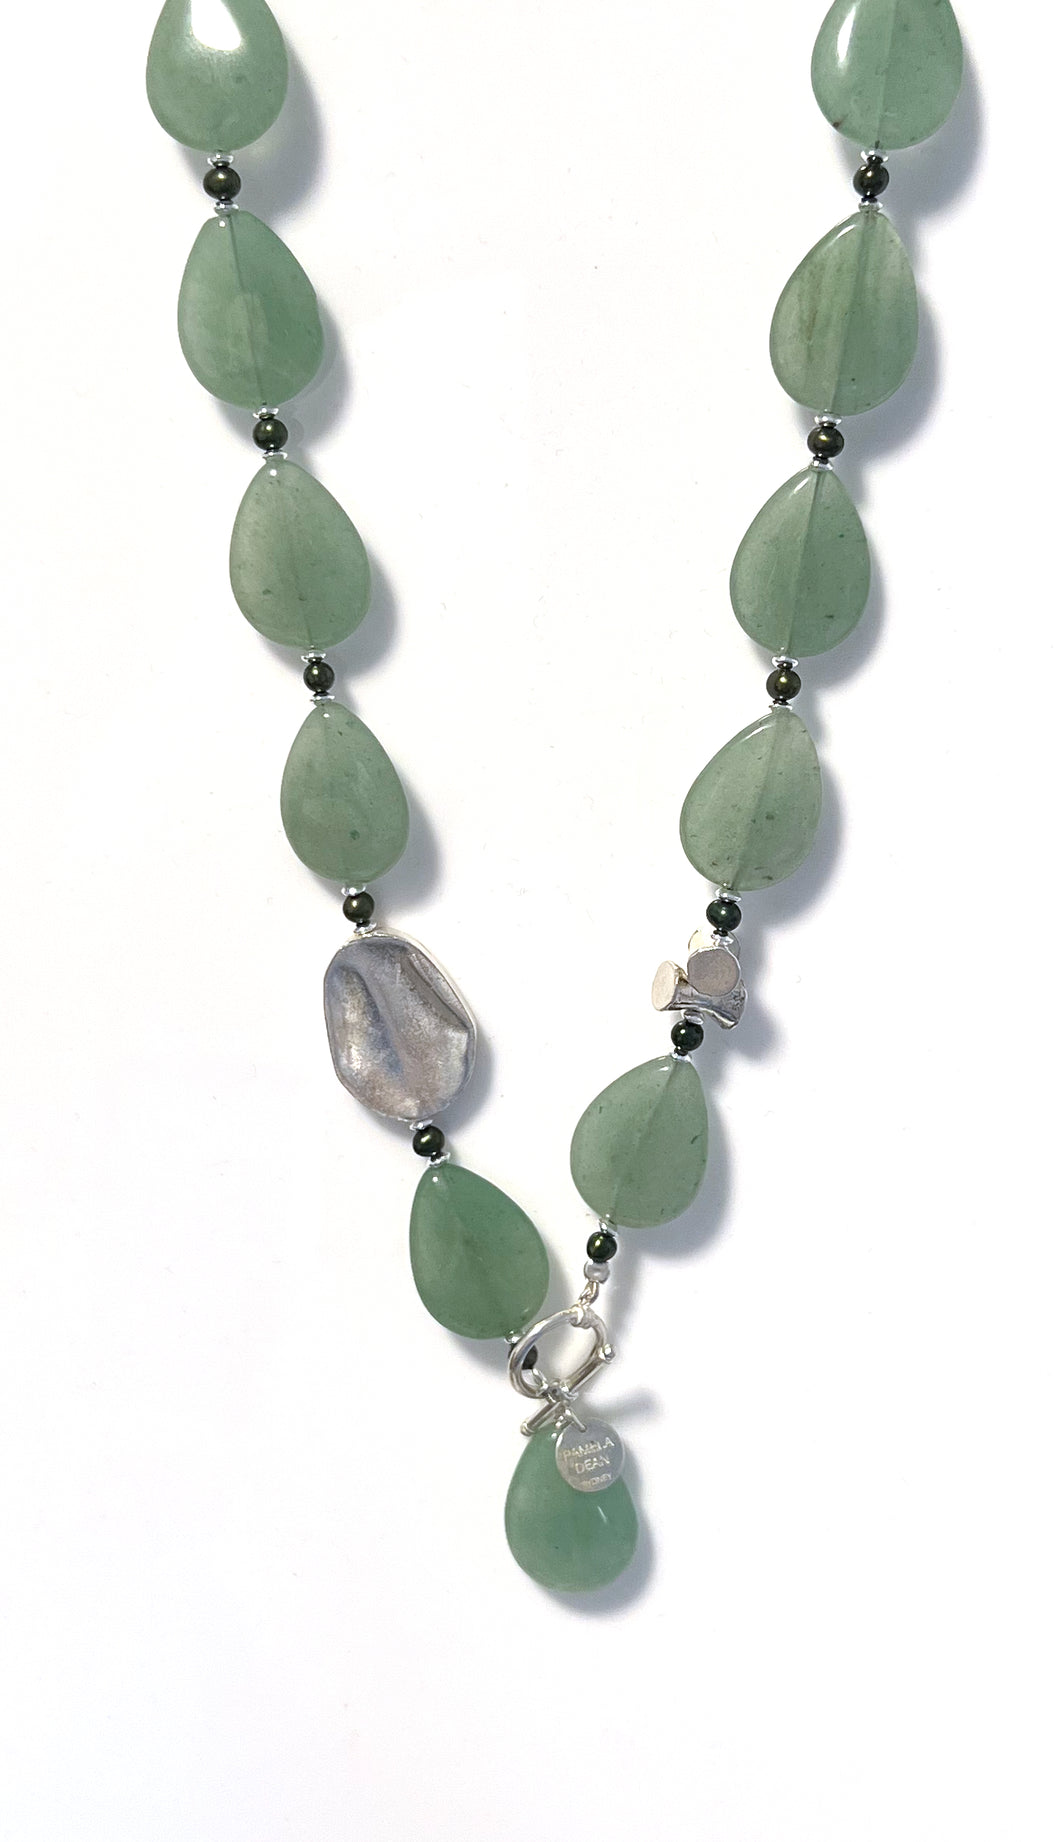 Australian Handmade Green Necklace with Aventurine Pearls and Sterling Silver